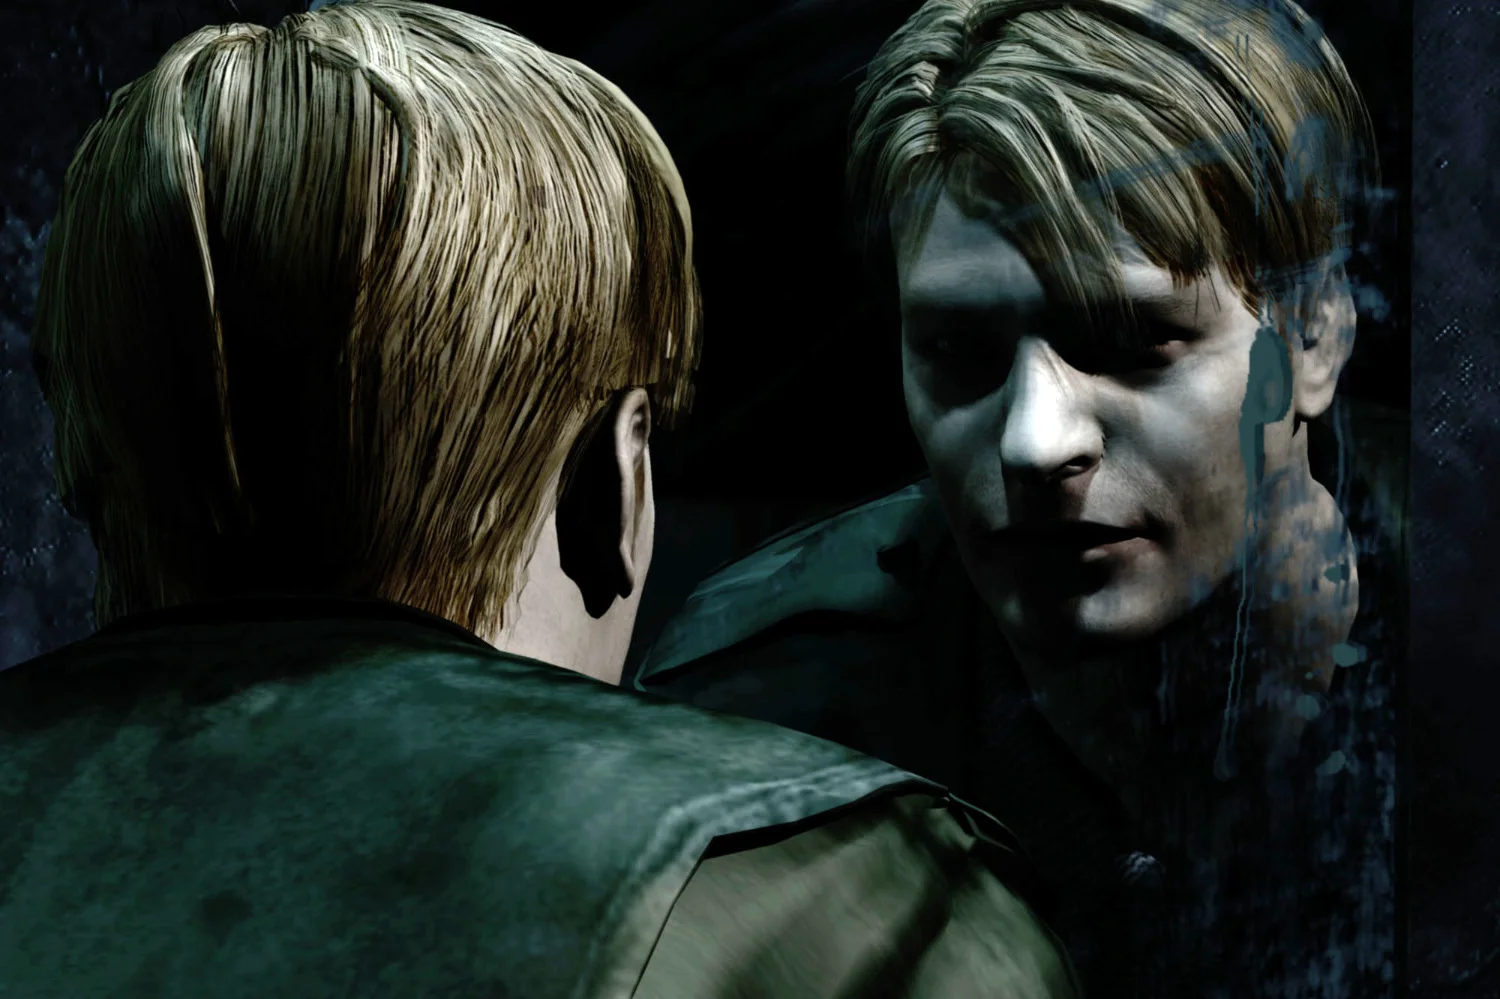 One of the oldest myths about Silent Hill 2 is destroyed